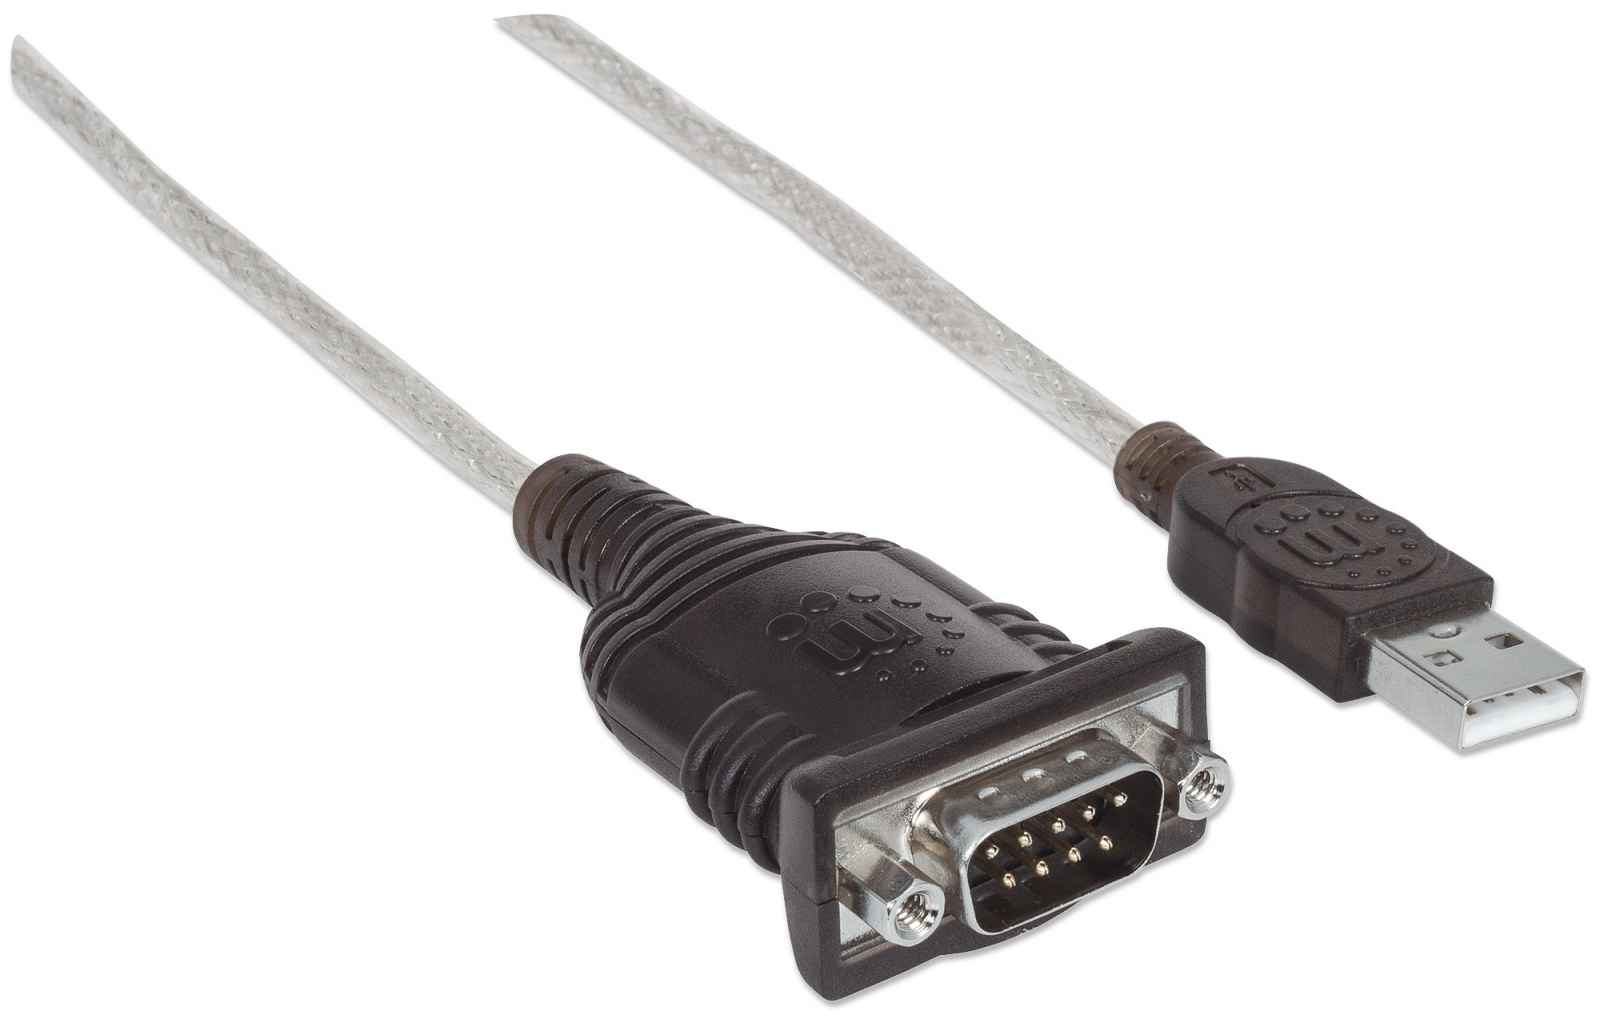 Manhattan USB-A to Serial Converter cable, 45cm, Male to Male, Serial/RS232/COM/DB9, Prolific PL-2303RA Chip, Black/Silver cable, Polybag